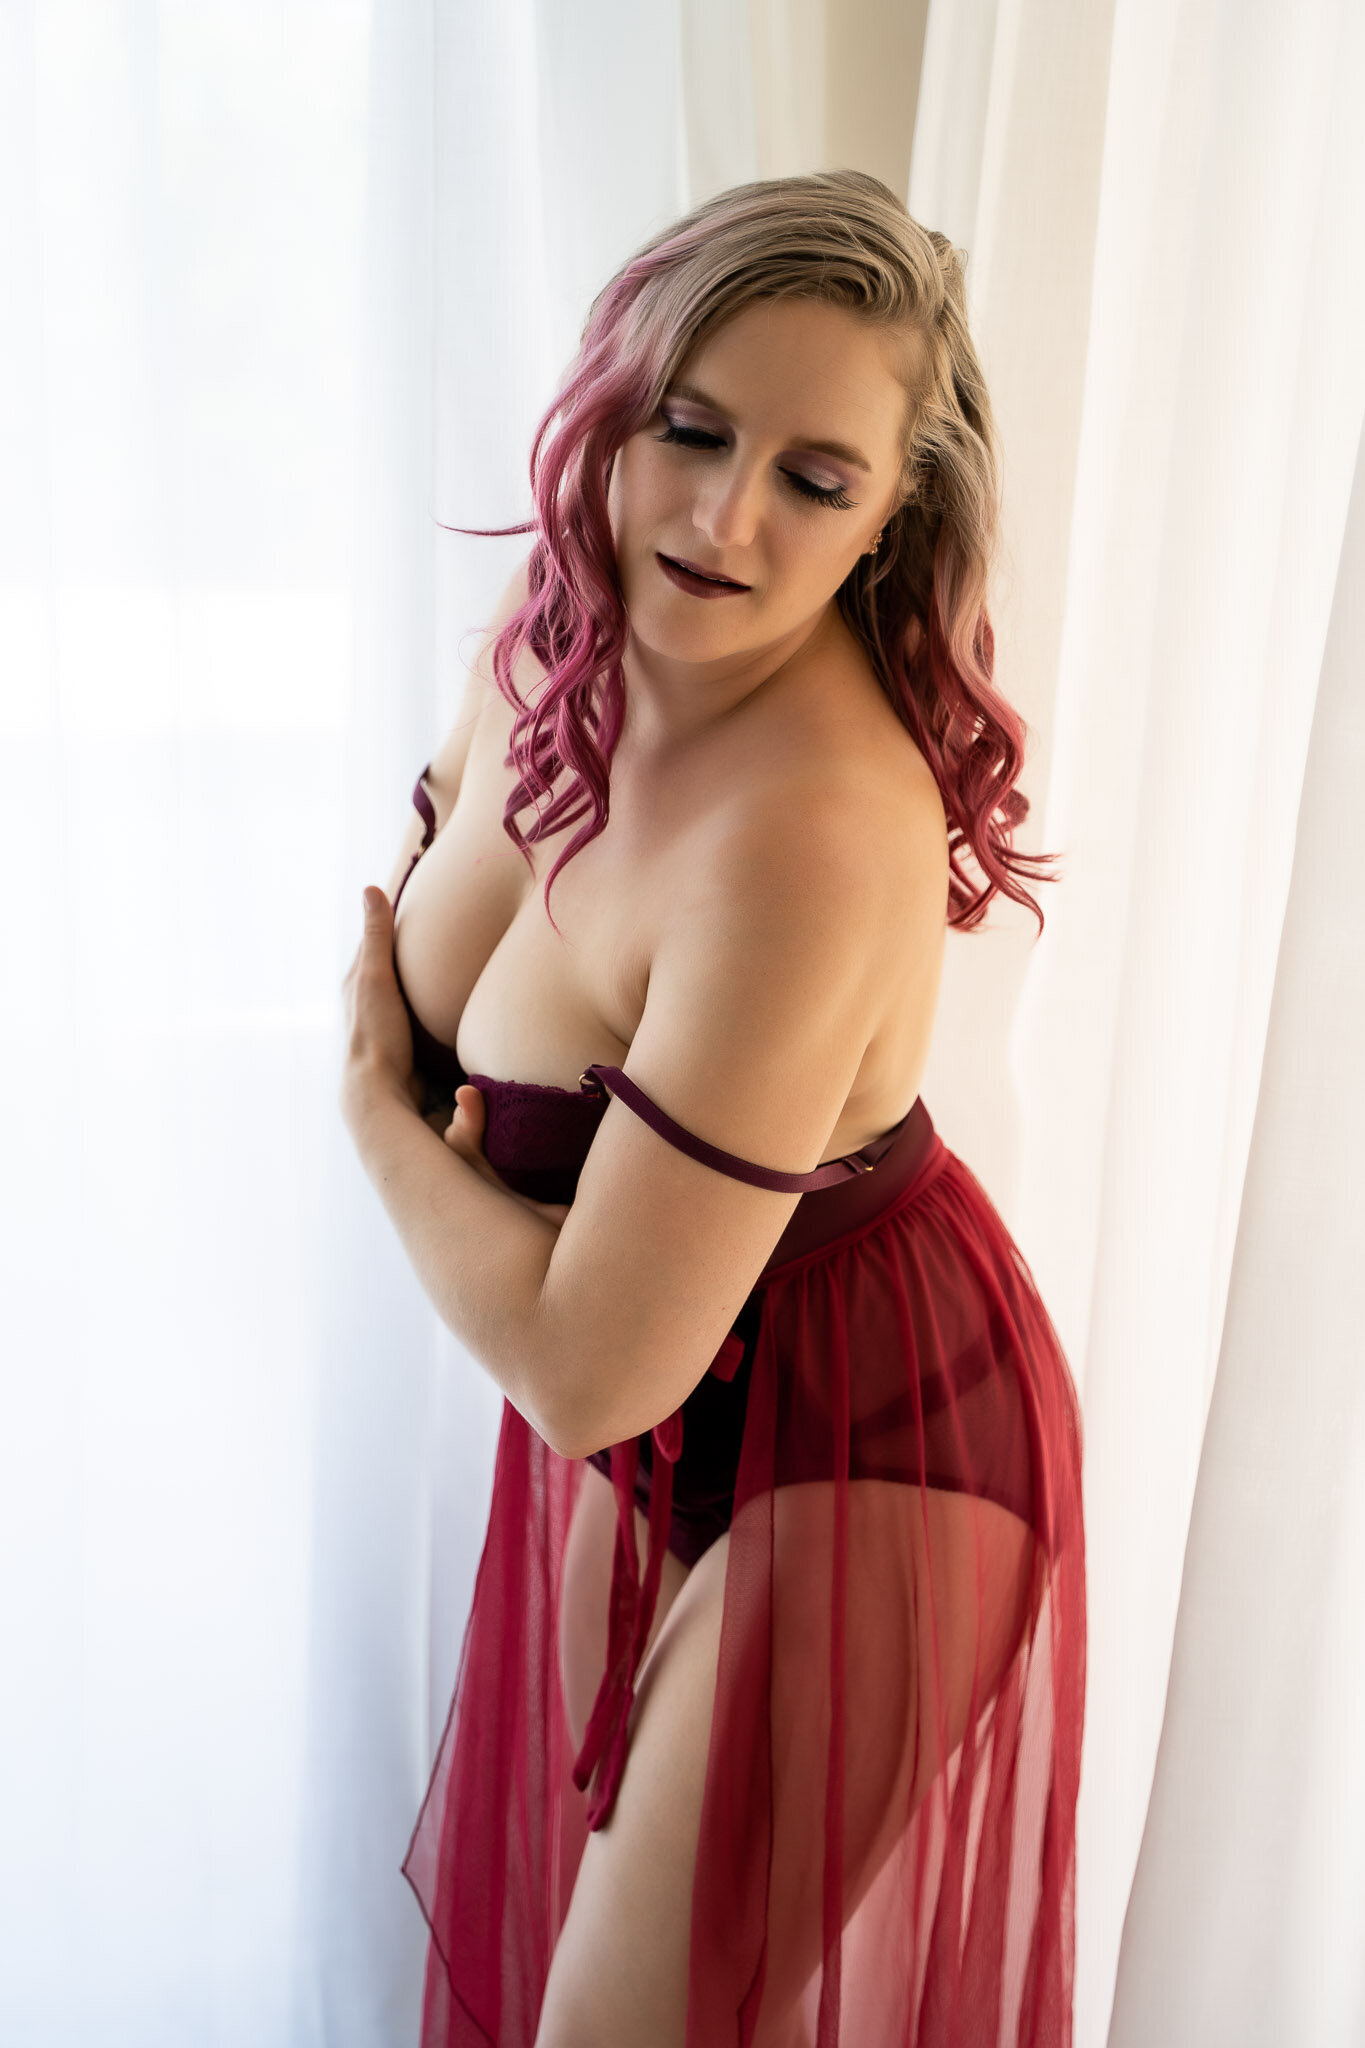 Arizona Boudoir Photography Client Closet With Lingerie In Every Size Including Plus Size In Our Photography Studio Near Prescott-59